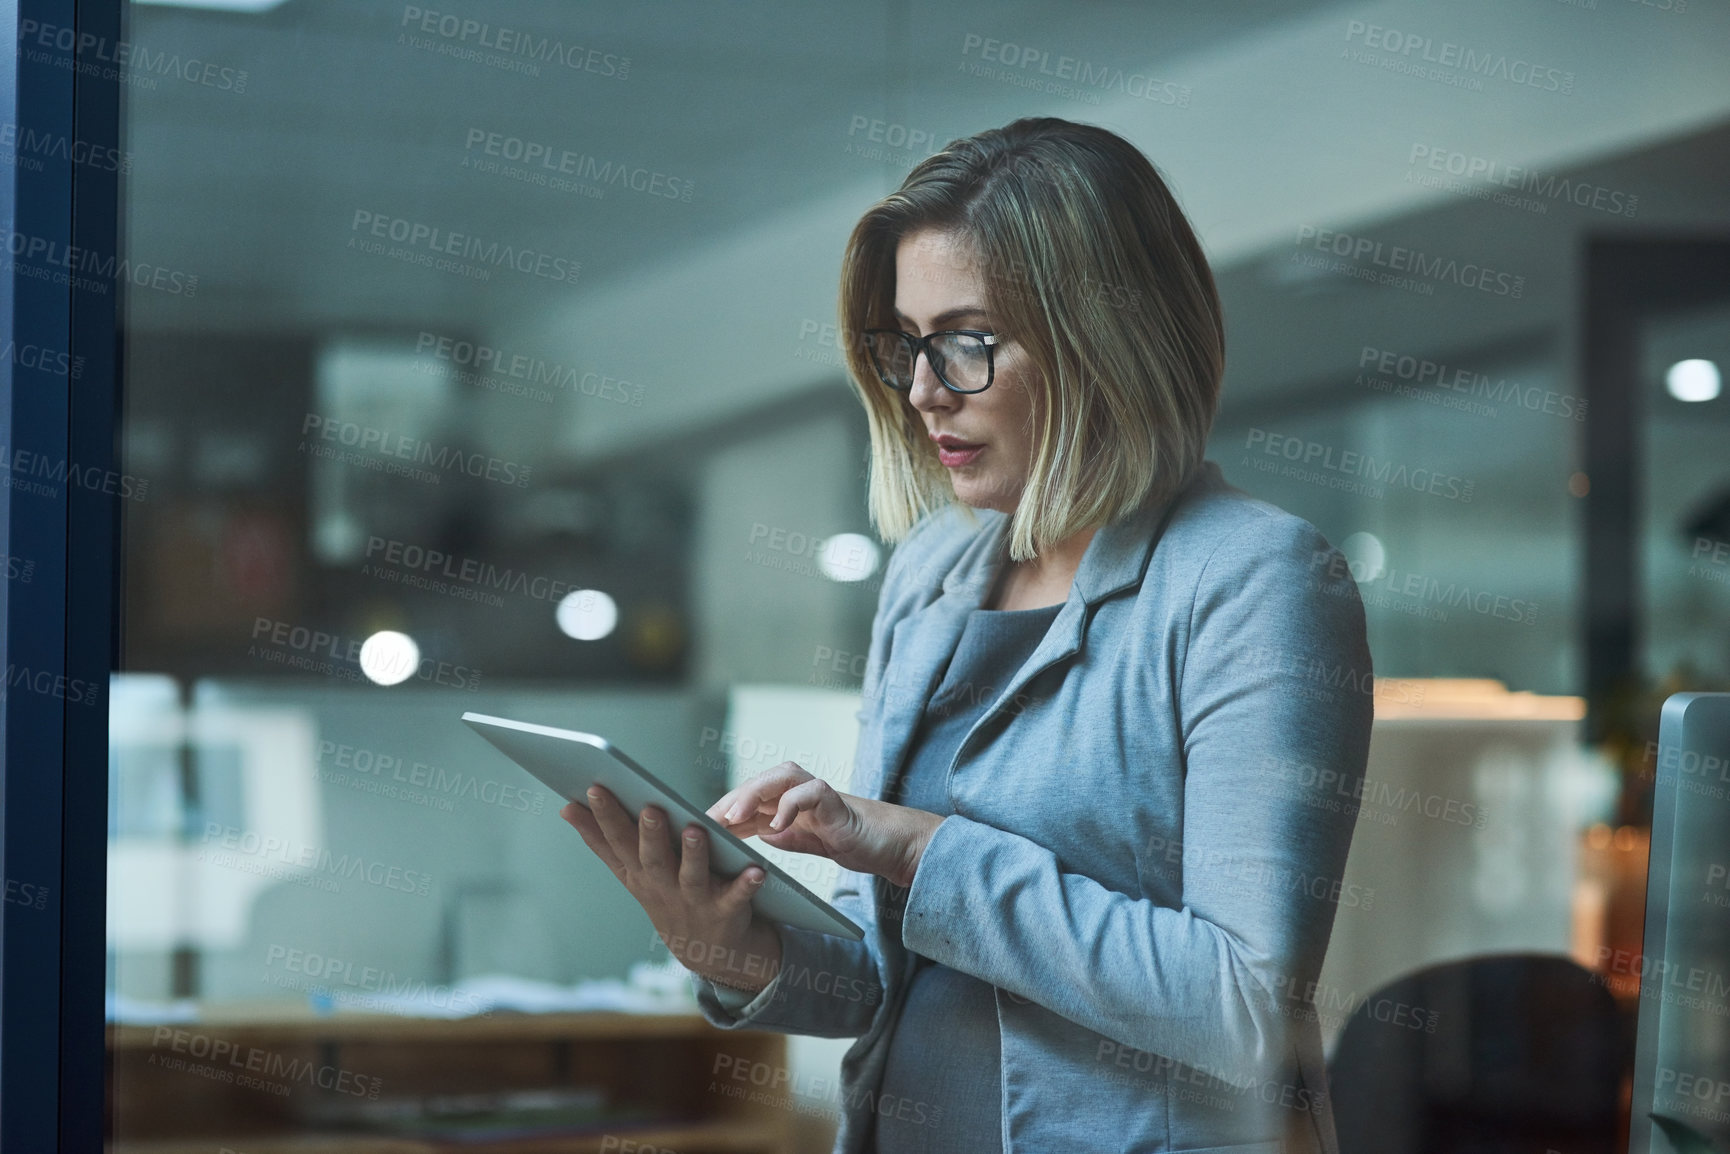 Buy stock photo Cropped shot of a businesswoman working on a digital tablet in her office late into the night